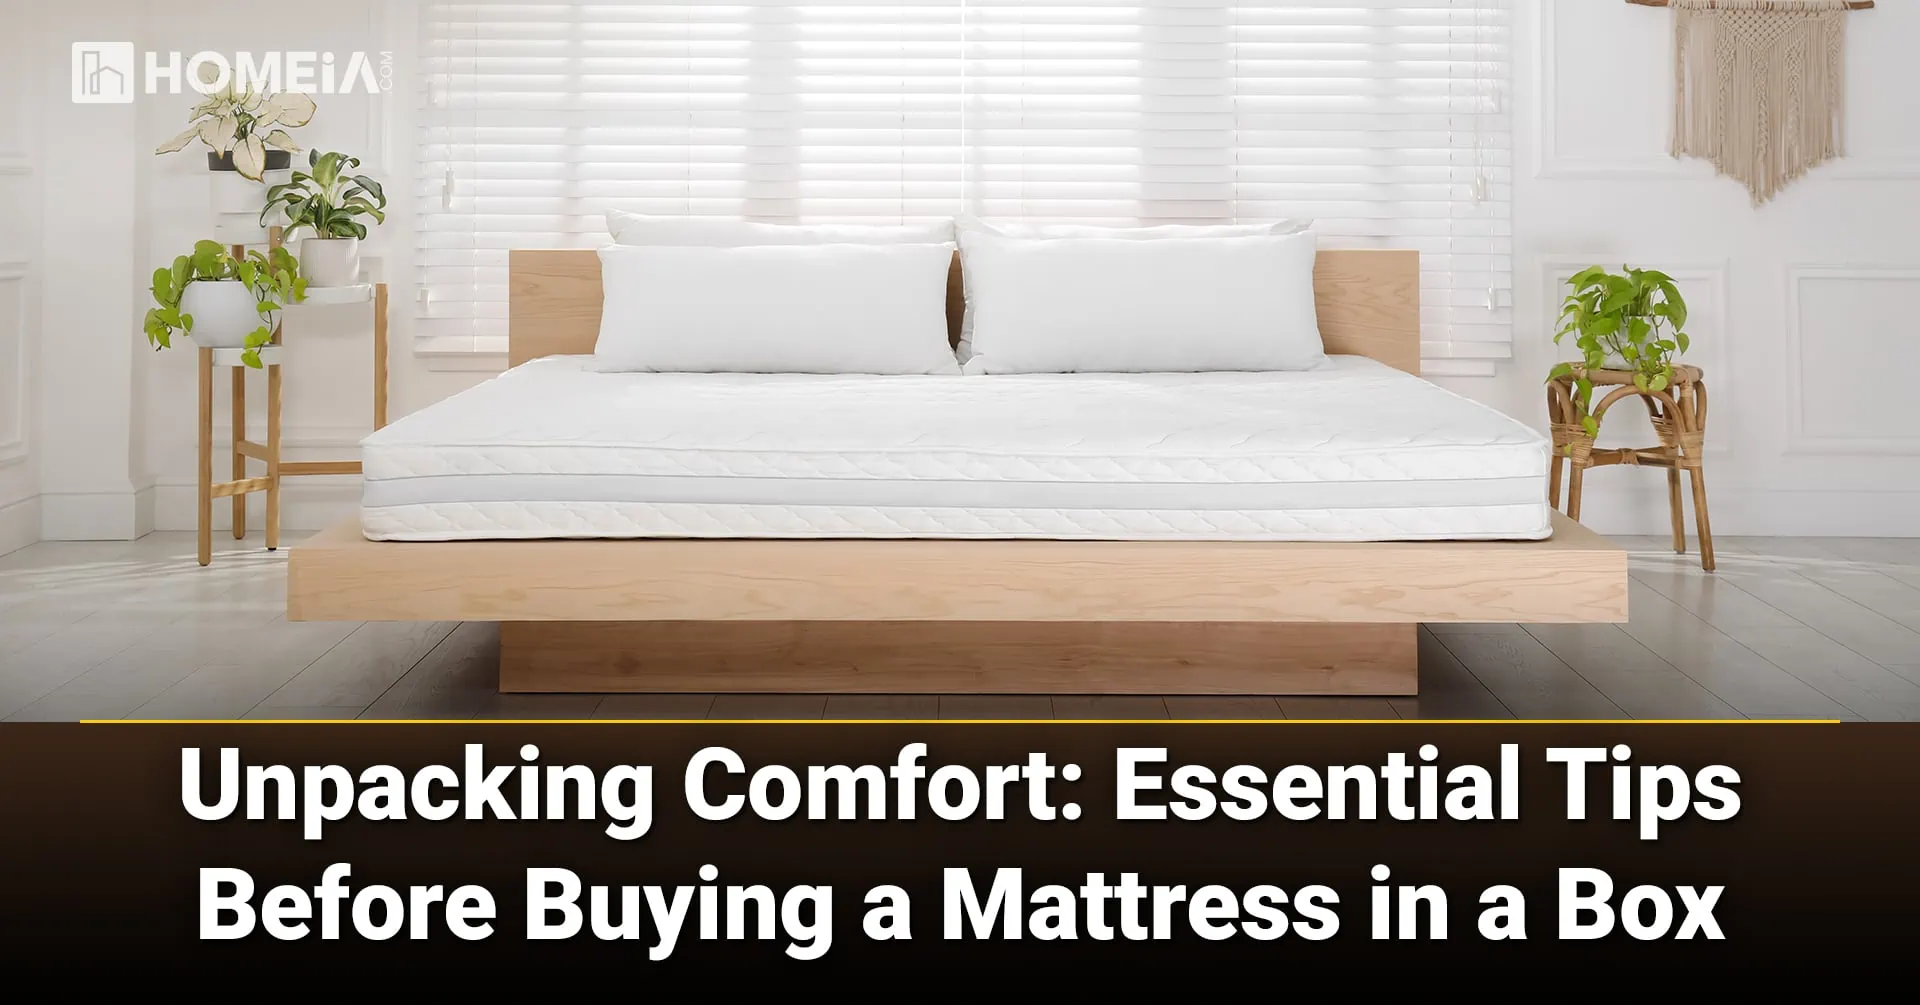 Unpacking Comfort: Essential Tips Before Buying a Mattress in a Box